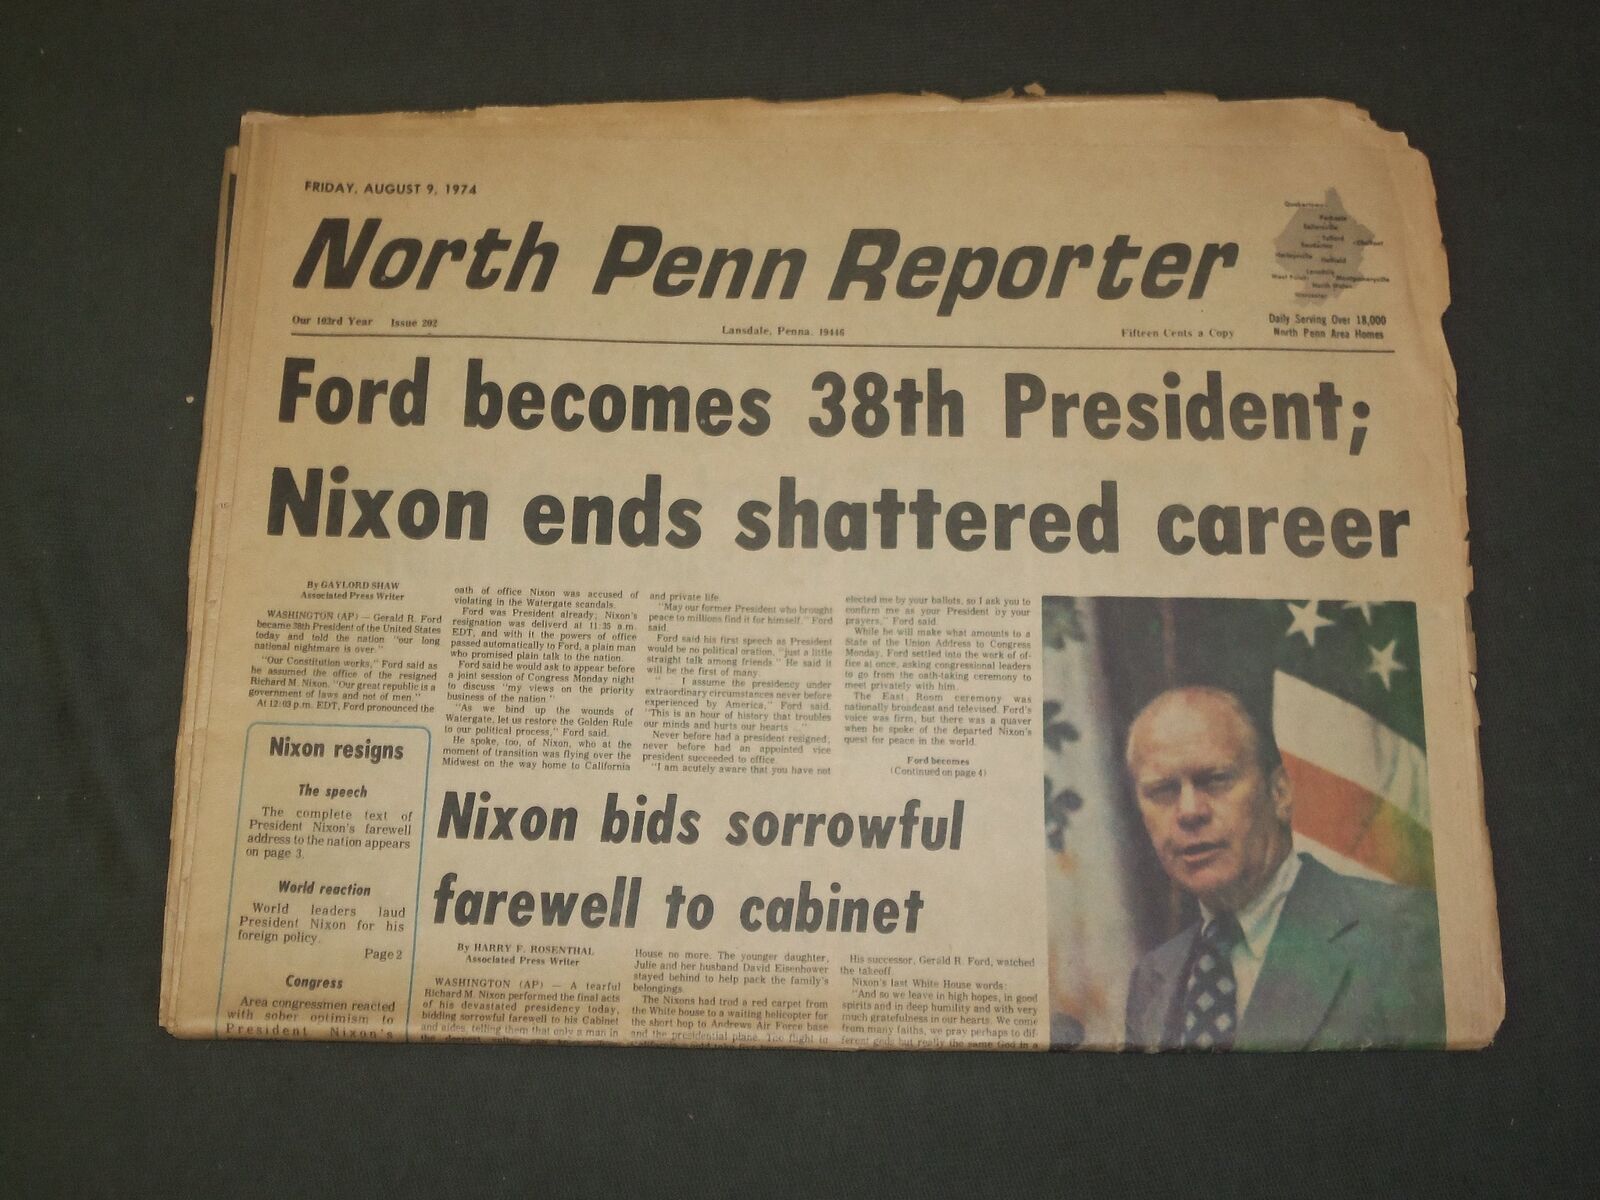 1974 AUGUST 9 NORTH PENN REPORTER NEWSPAPER - GERALD FORD INAUGURATION - NP 3255